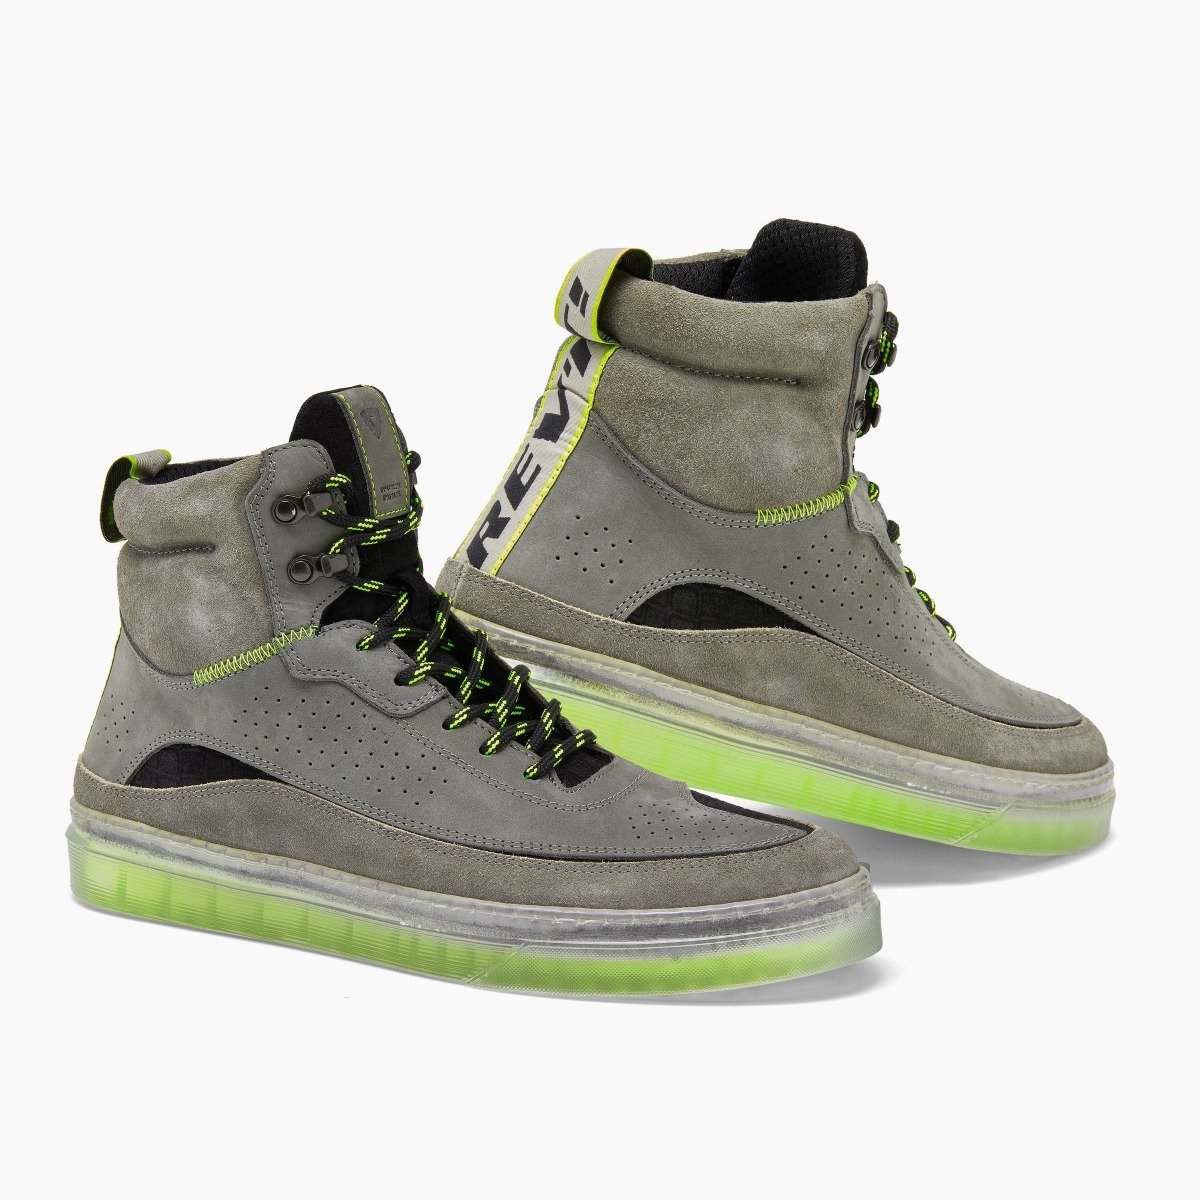 Image of REV'IT! Filter Gray Neon Yellow Motorcycle Shoes Talla 47